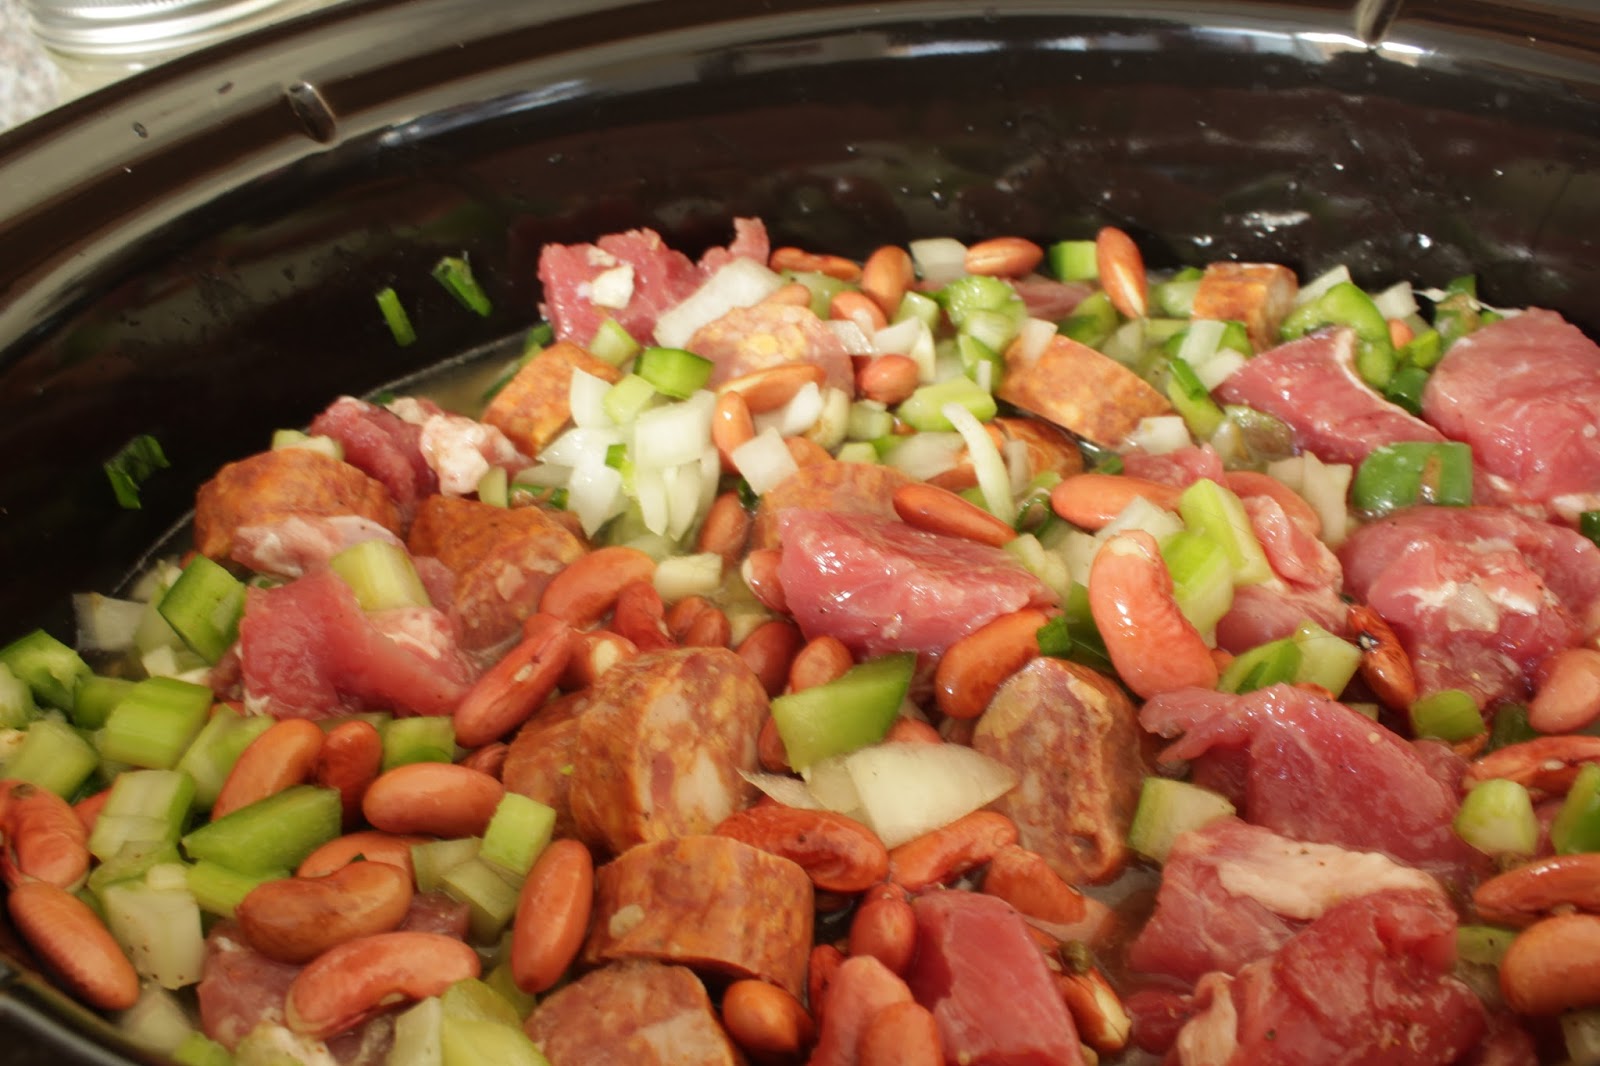 Red Beans in the Crock Pot